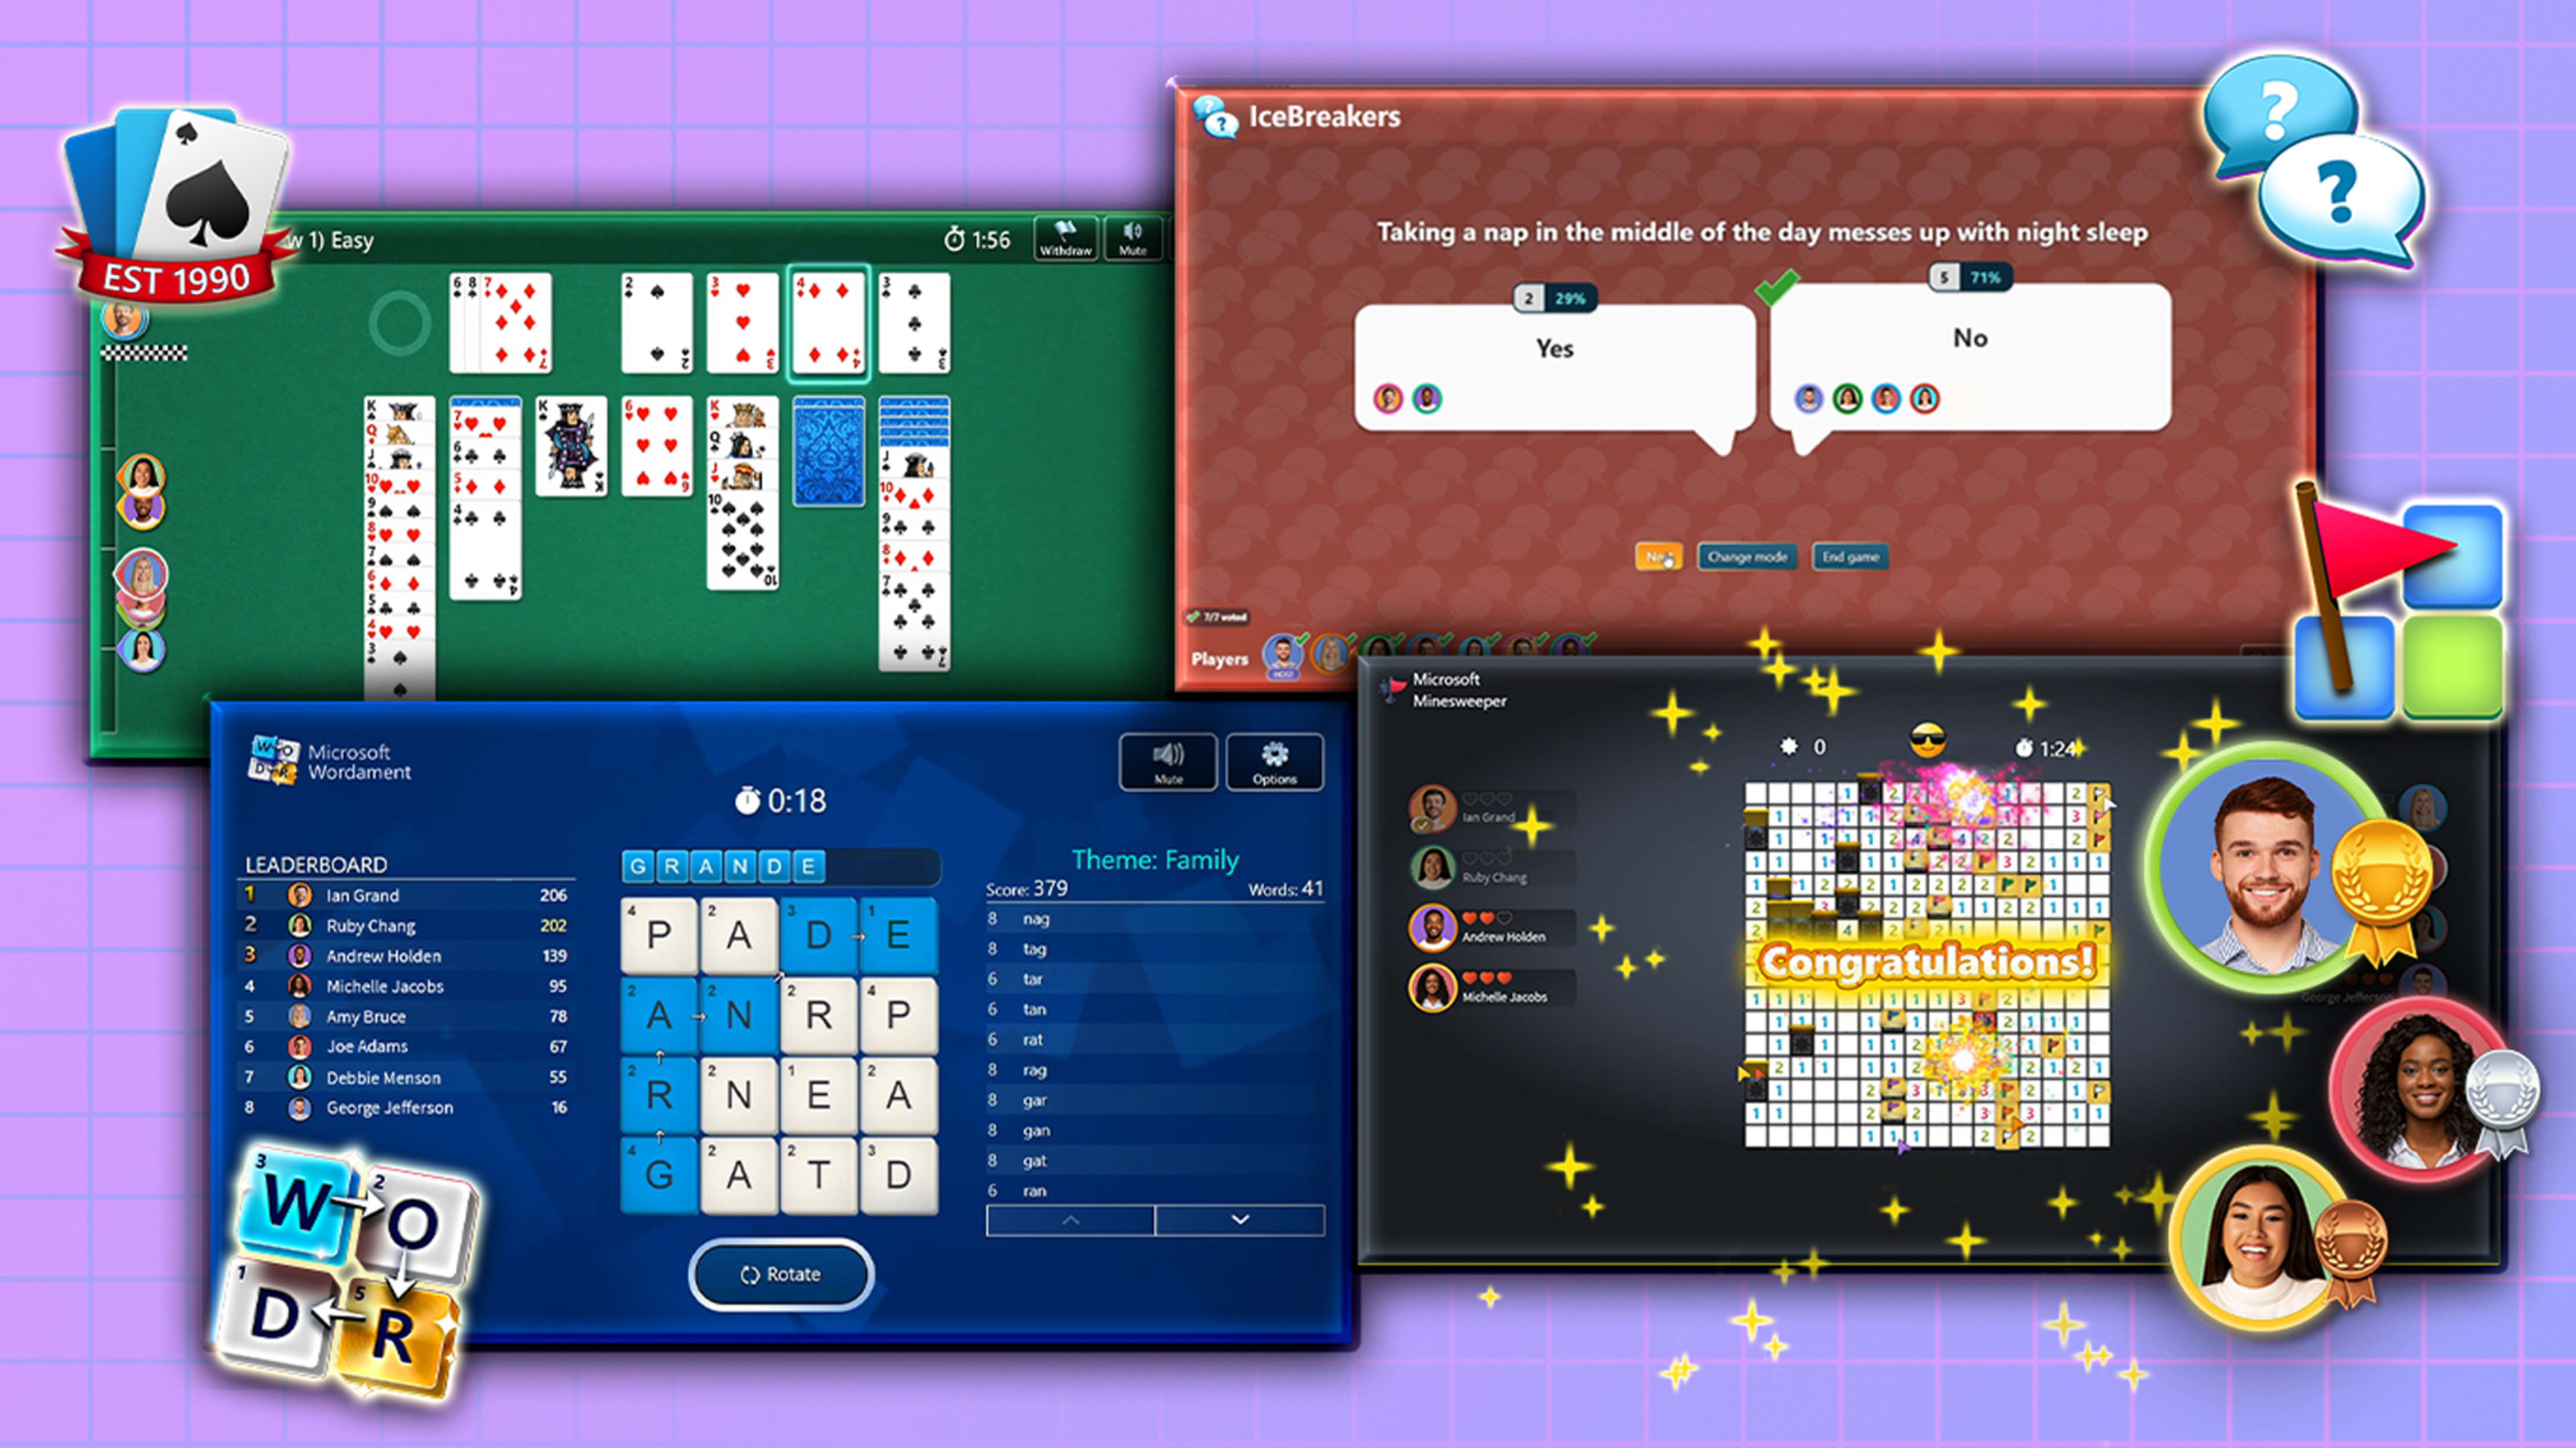 Microsoft is rolling out multiplayer Solitaire and Minesweeper for its Teams platform